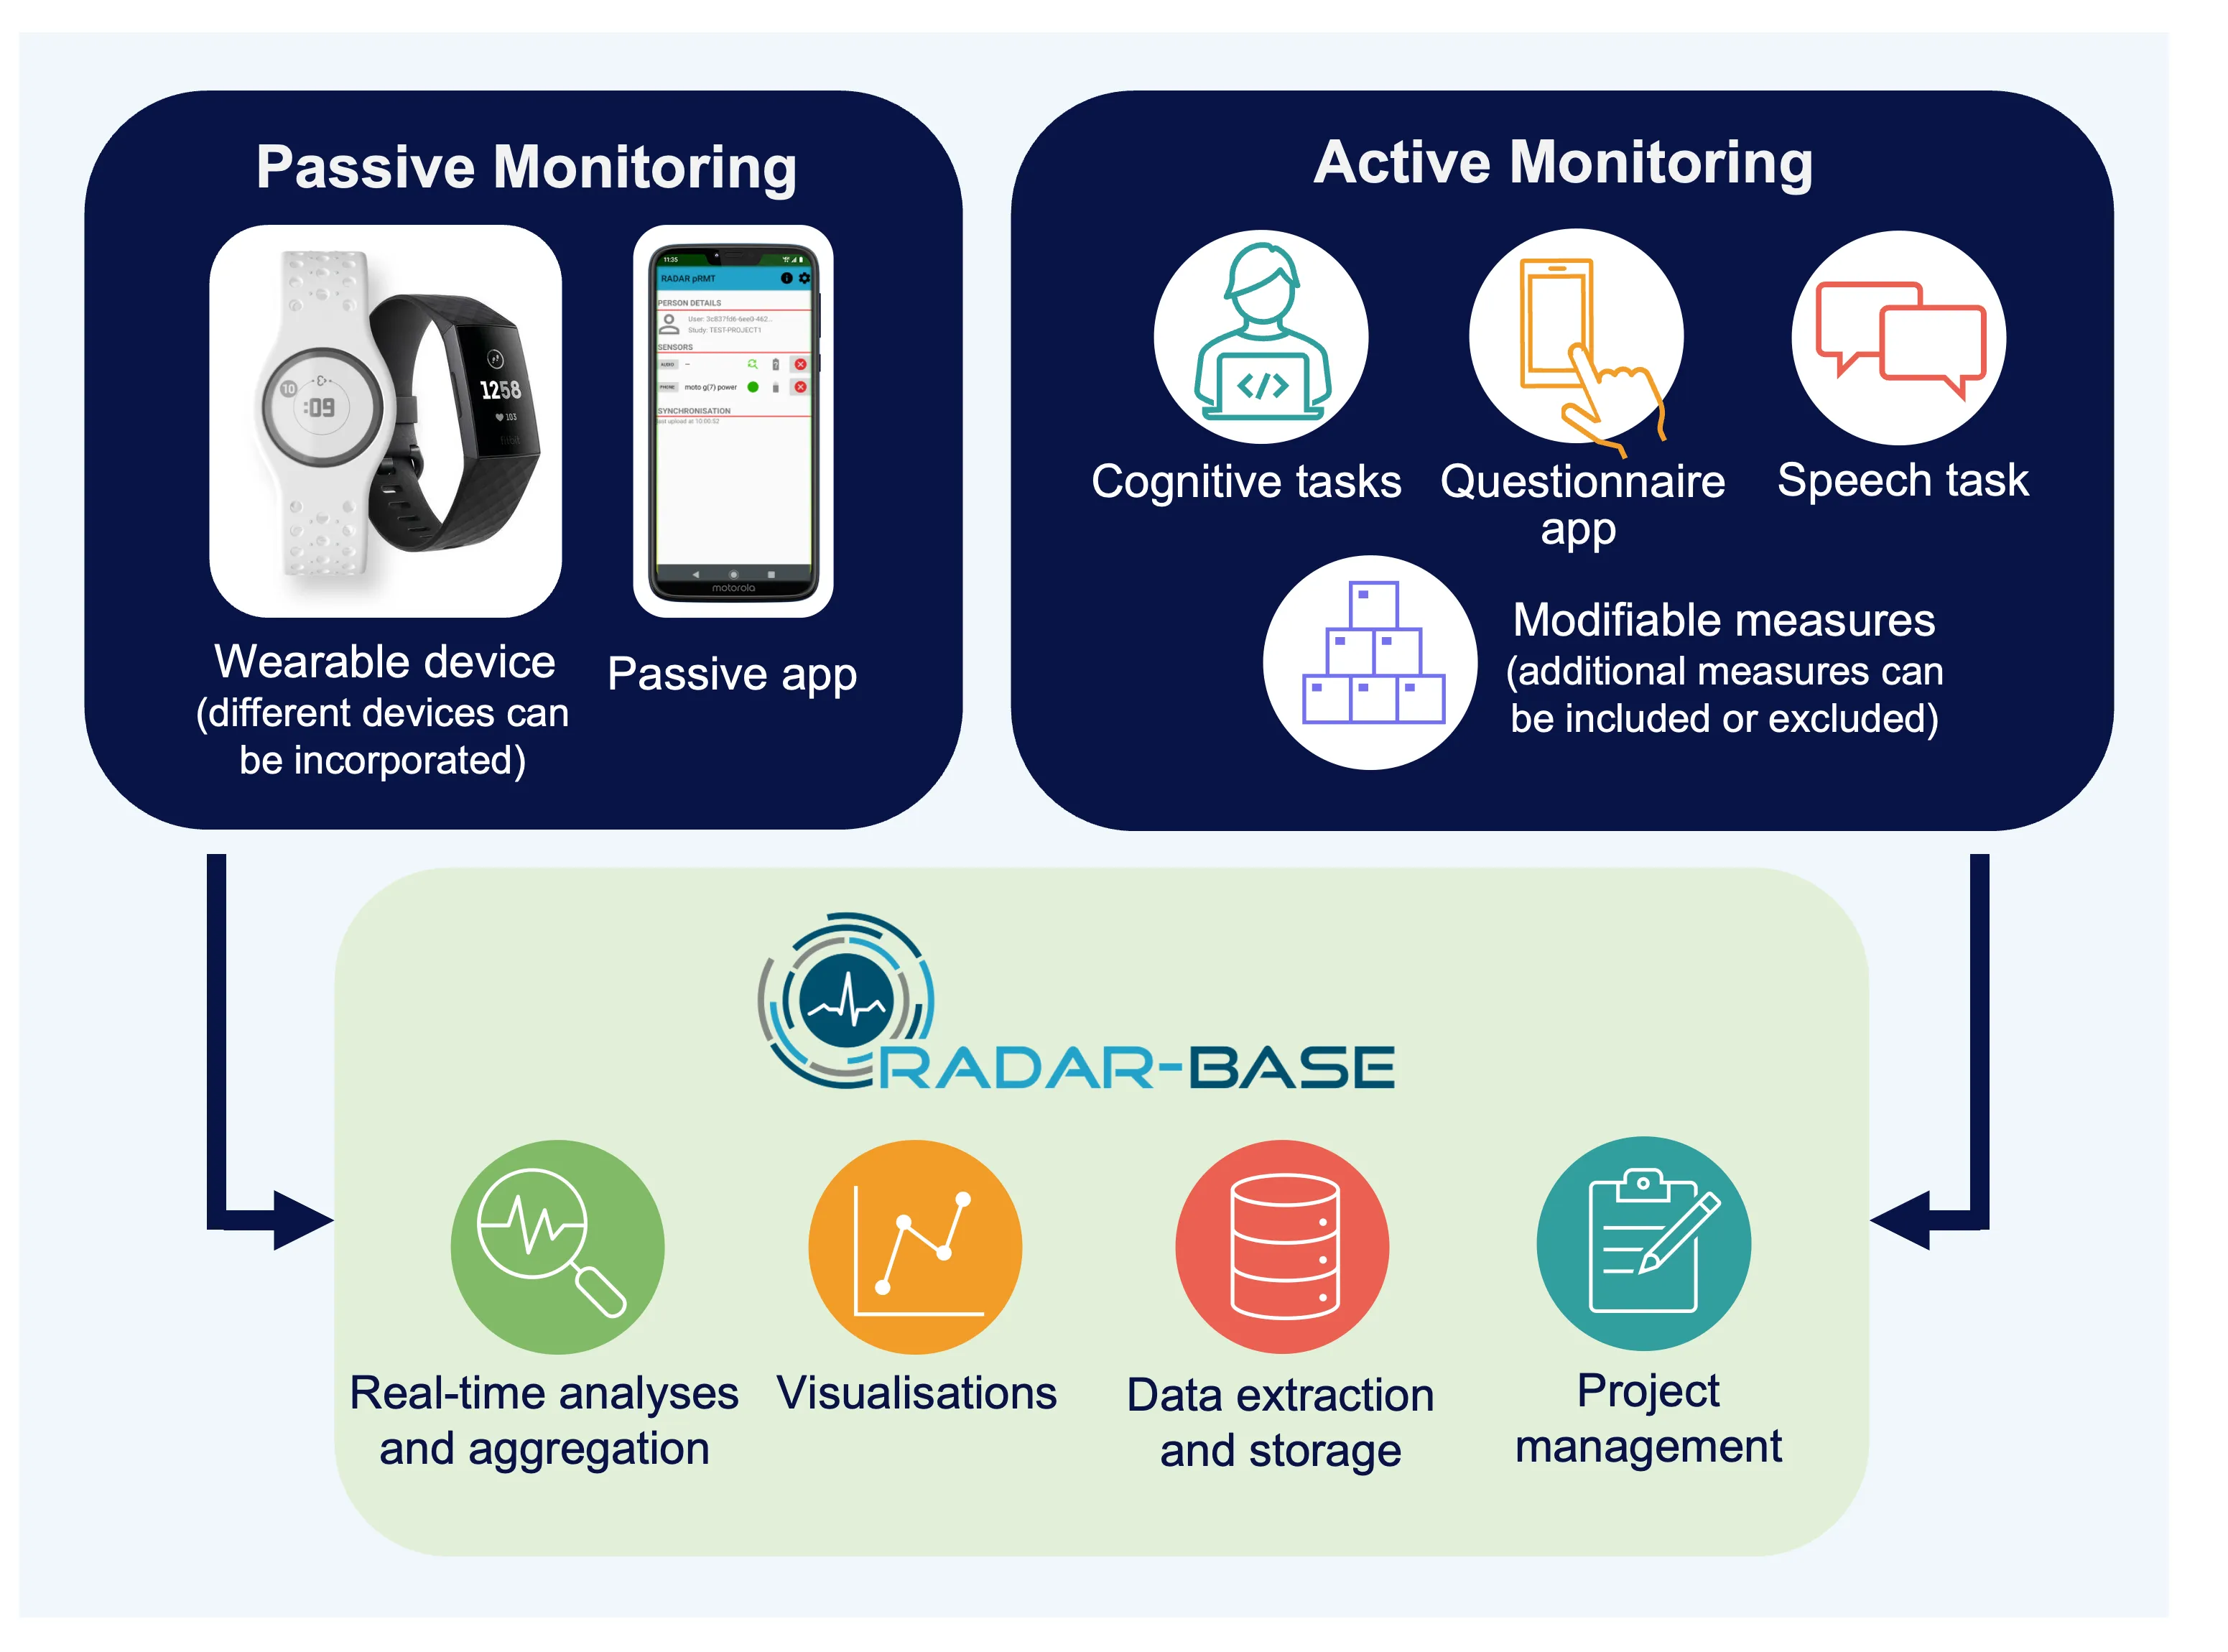 An Infographic which describes the data collection in ART. Passive monitoring (wearable device (different devices can be incorporated) and passive app) and active monitoring (cognitive tasks, questionnaire app, speech task, and modifiable measures (additional measures can be included or excluded)) feed into RADAR-BASE for real-time analyses and aggregation, visualisations, data extraction and storage, and project management.